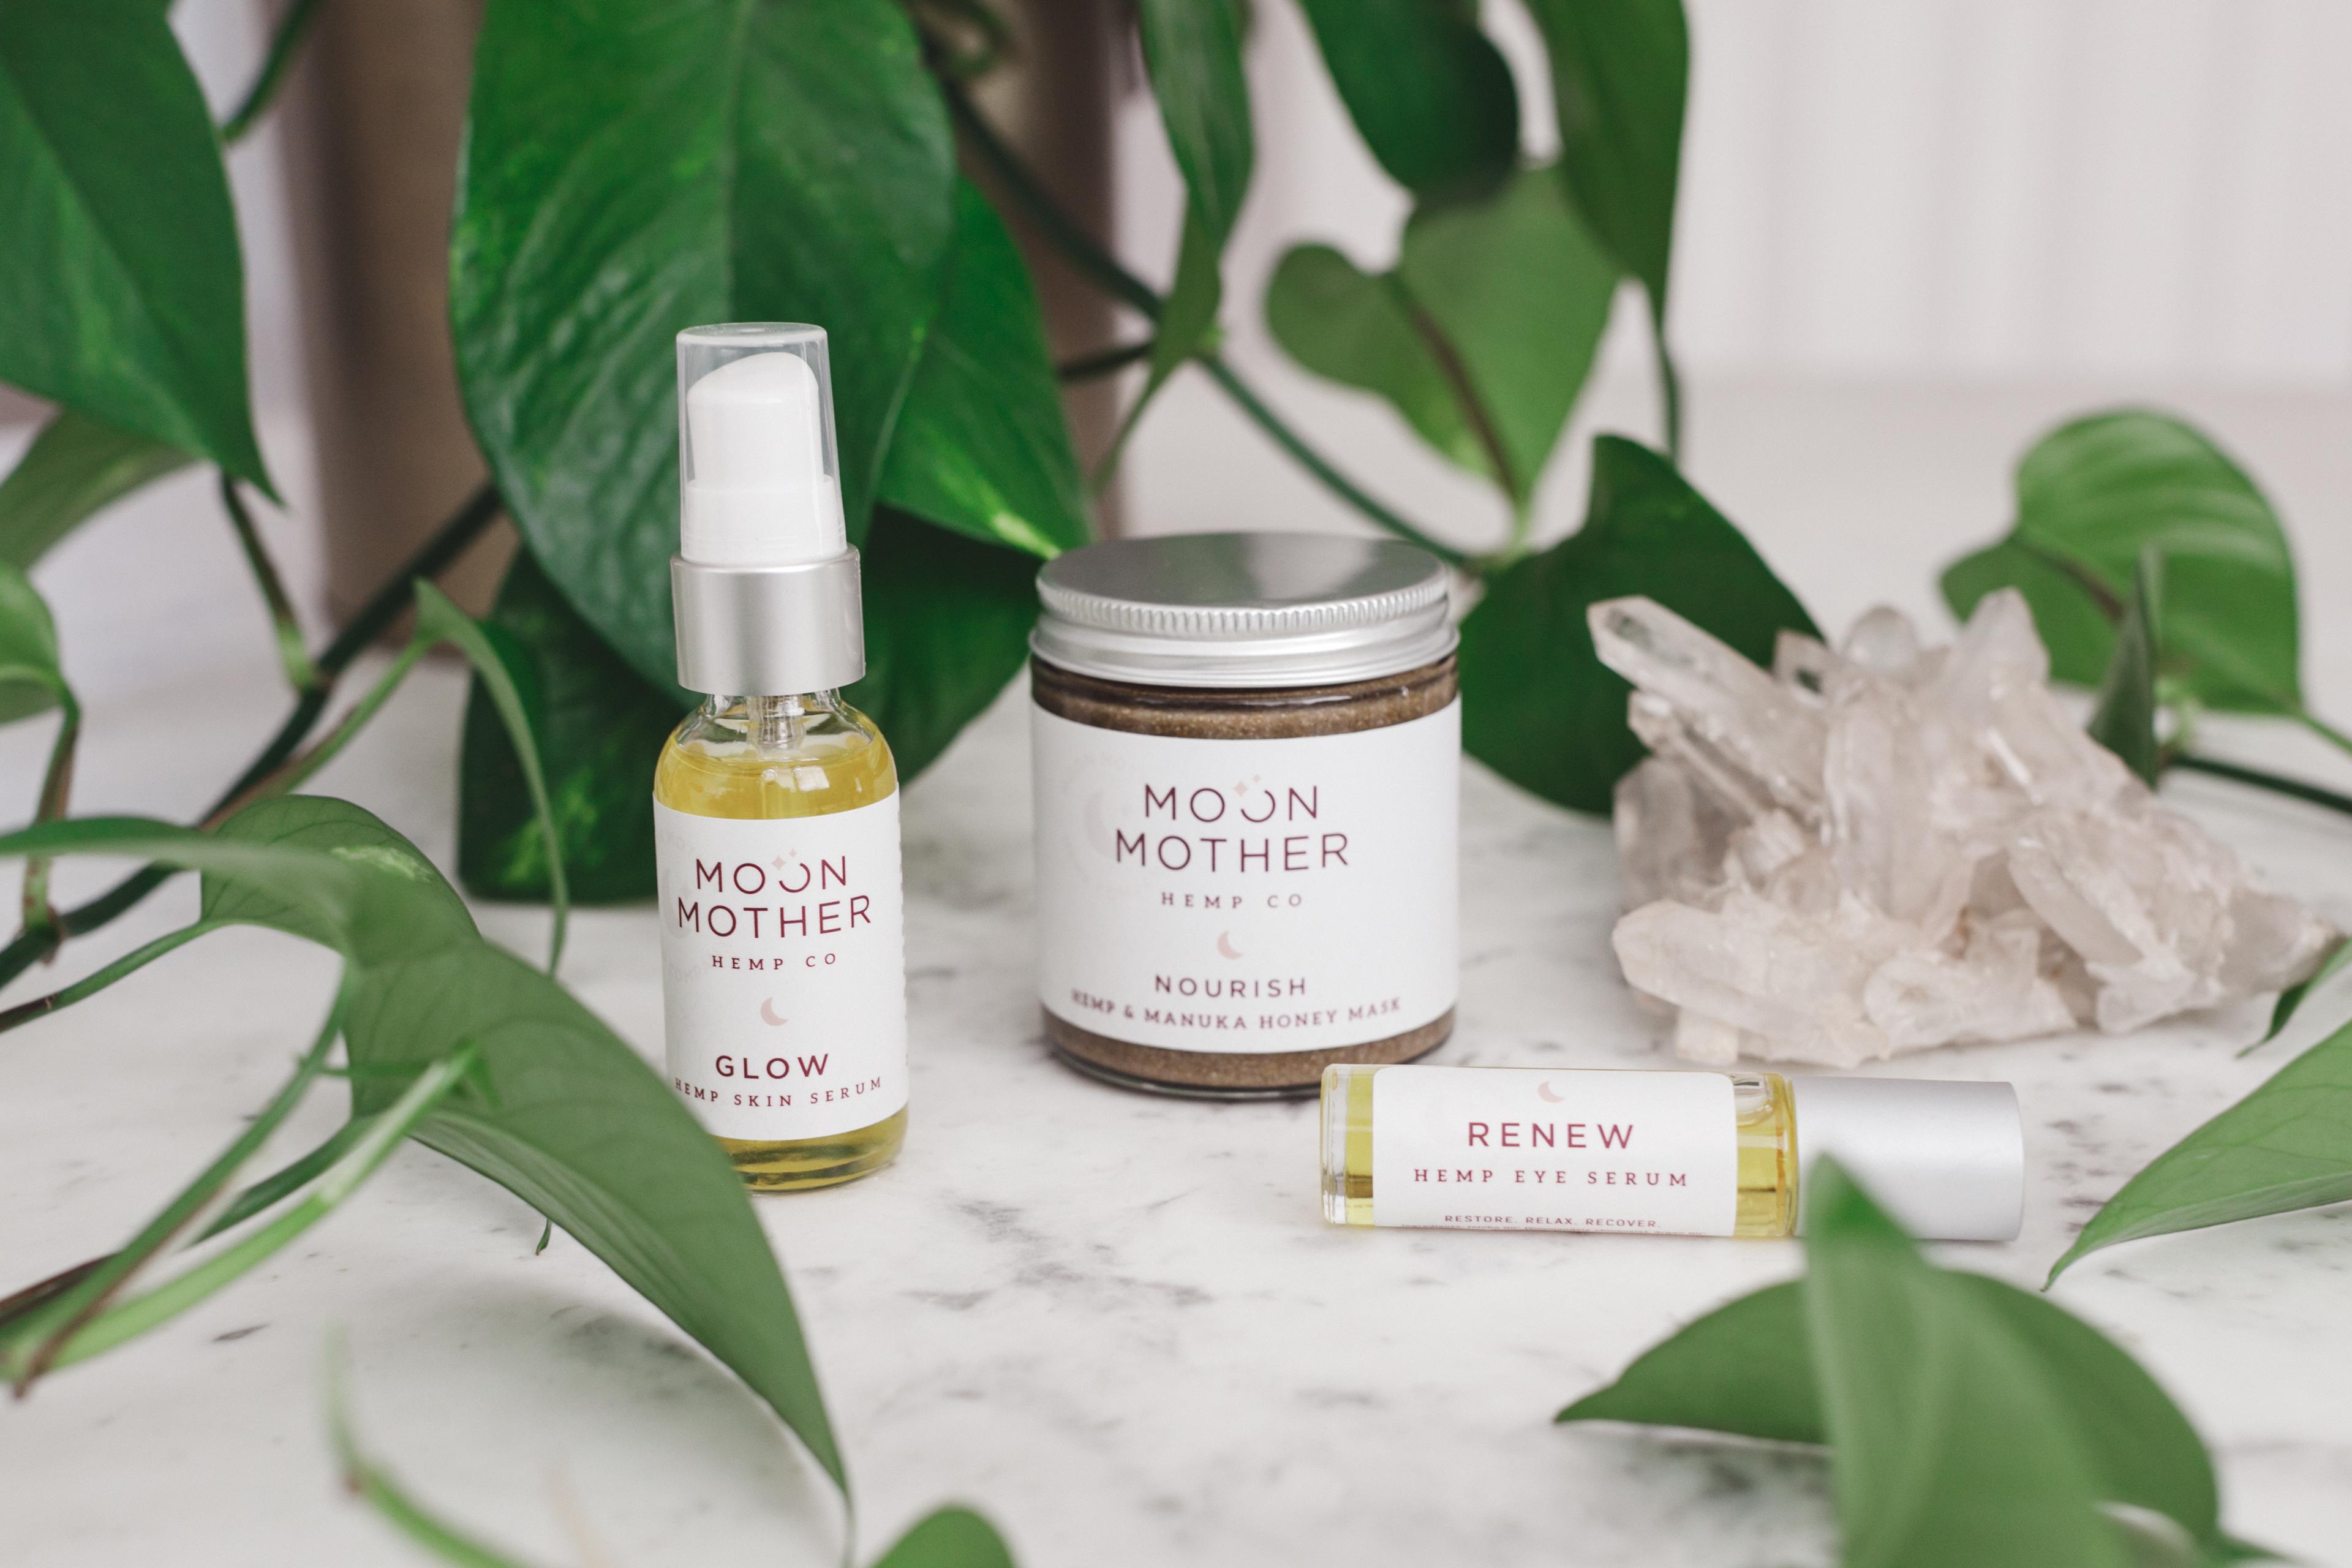 This Clean, Hemp-Infused Serum Delivers Your Most Glowing Skin